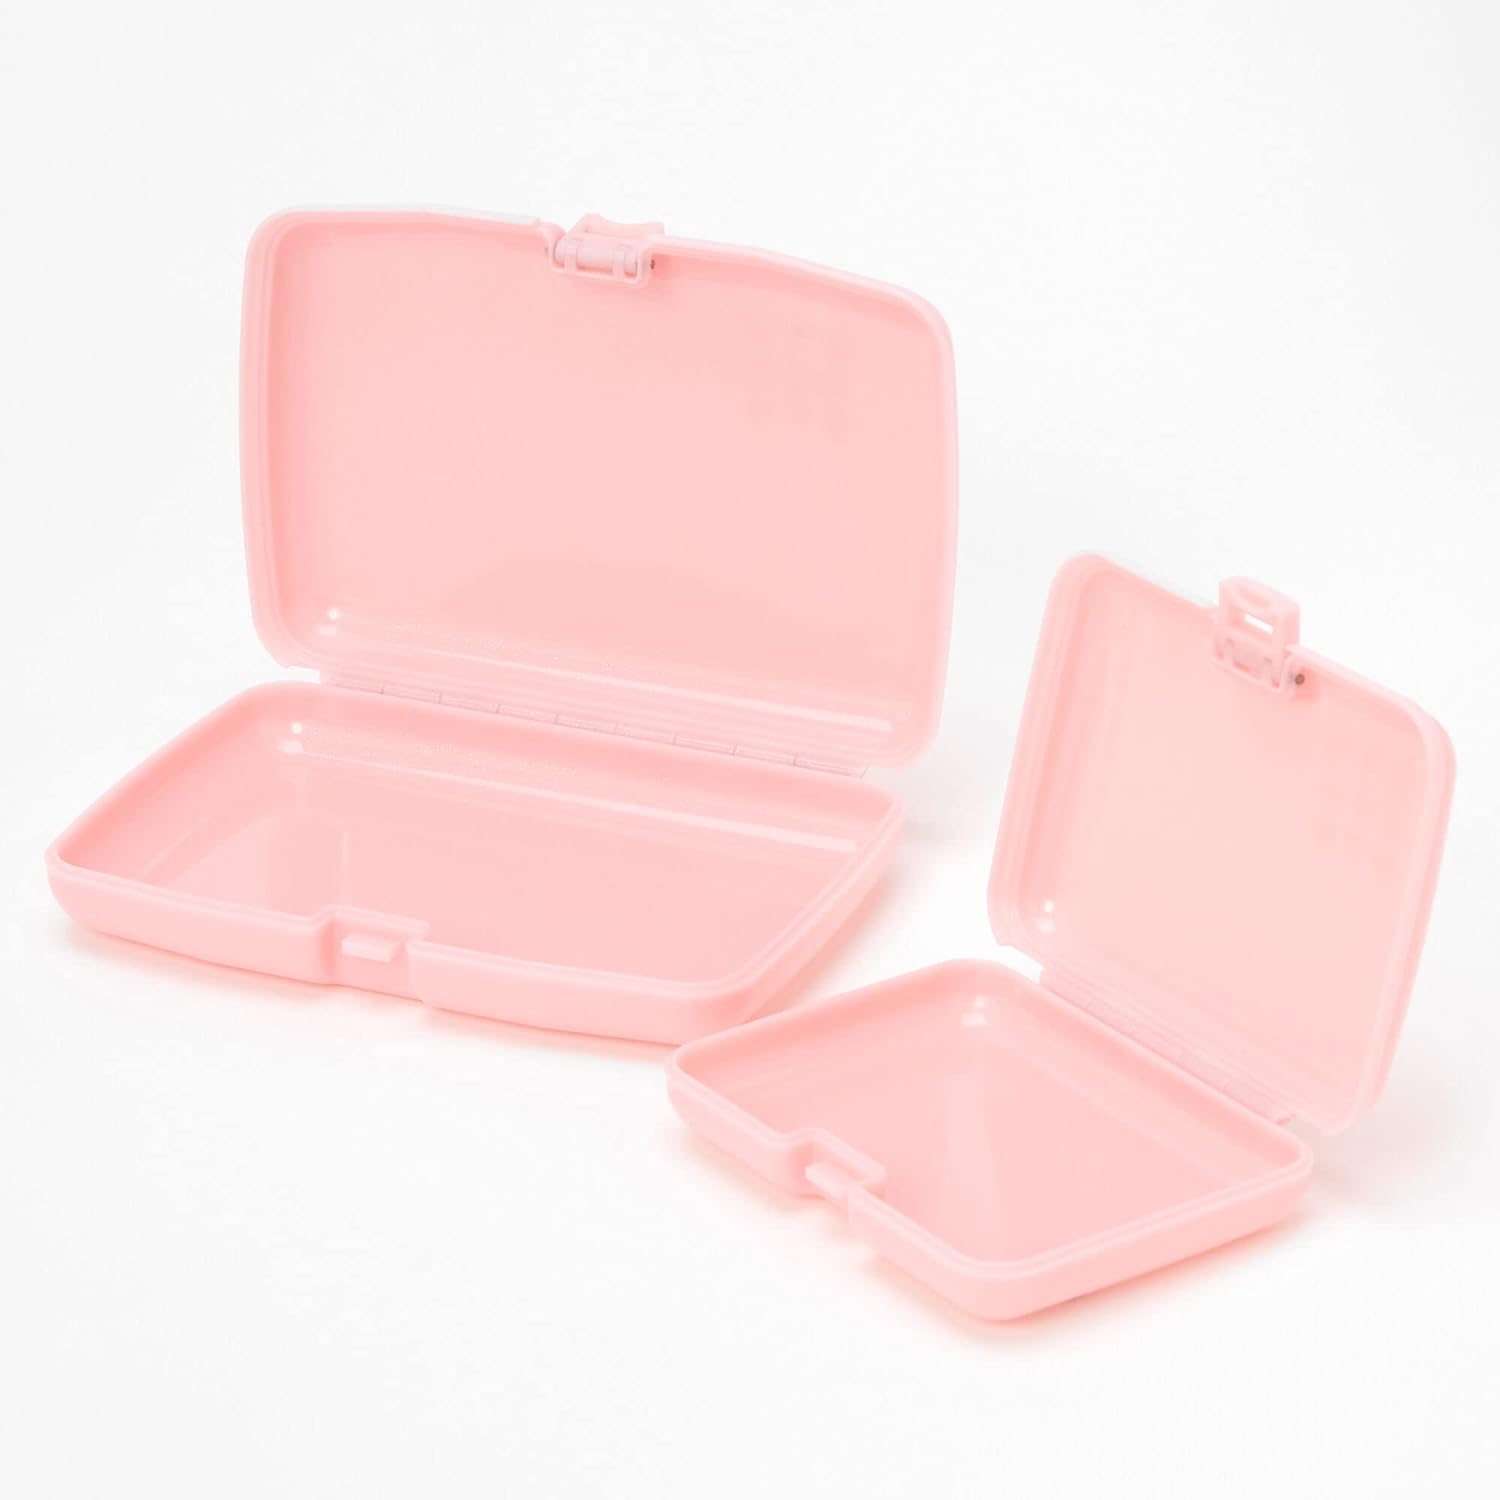 These big beautiful cases are back for our kids and I'm psyched. They're just as useful as I remember from the 90s: tackleboxes for make up, jewelry, stationery or whatever. Nice size for all sorts of items and great coloring in person. Very giftable.